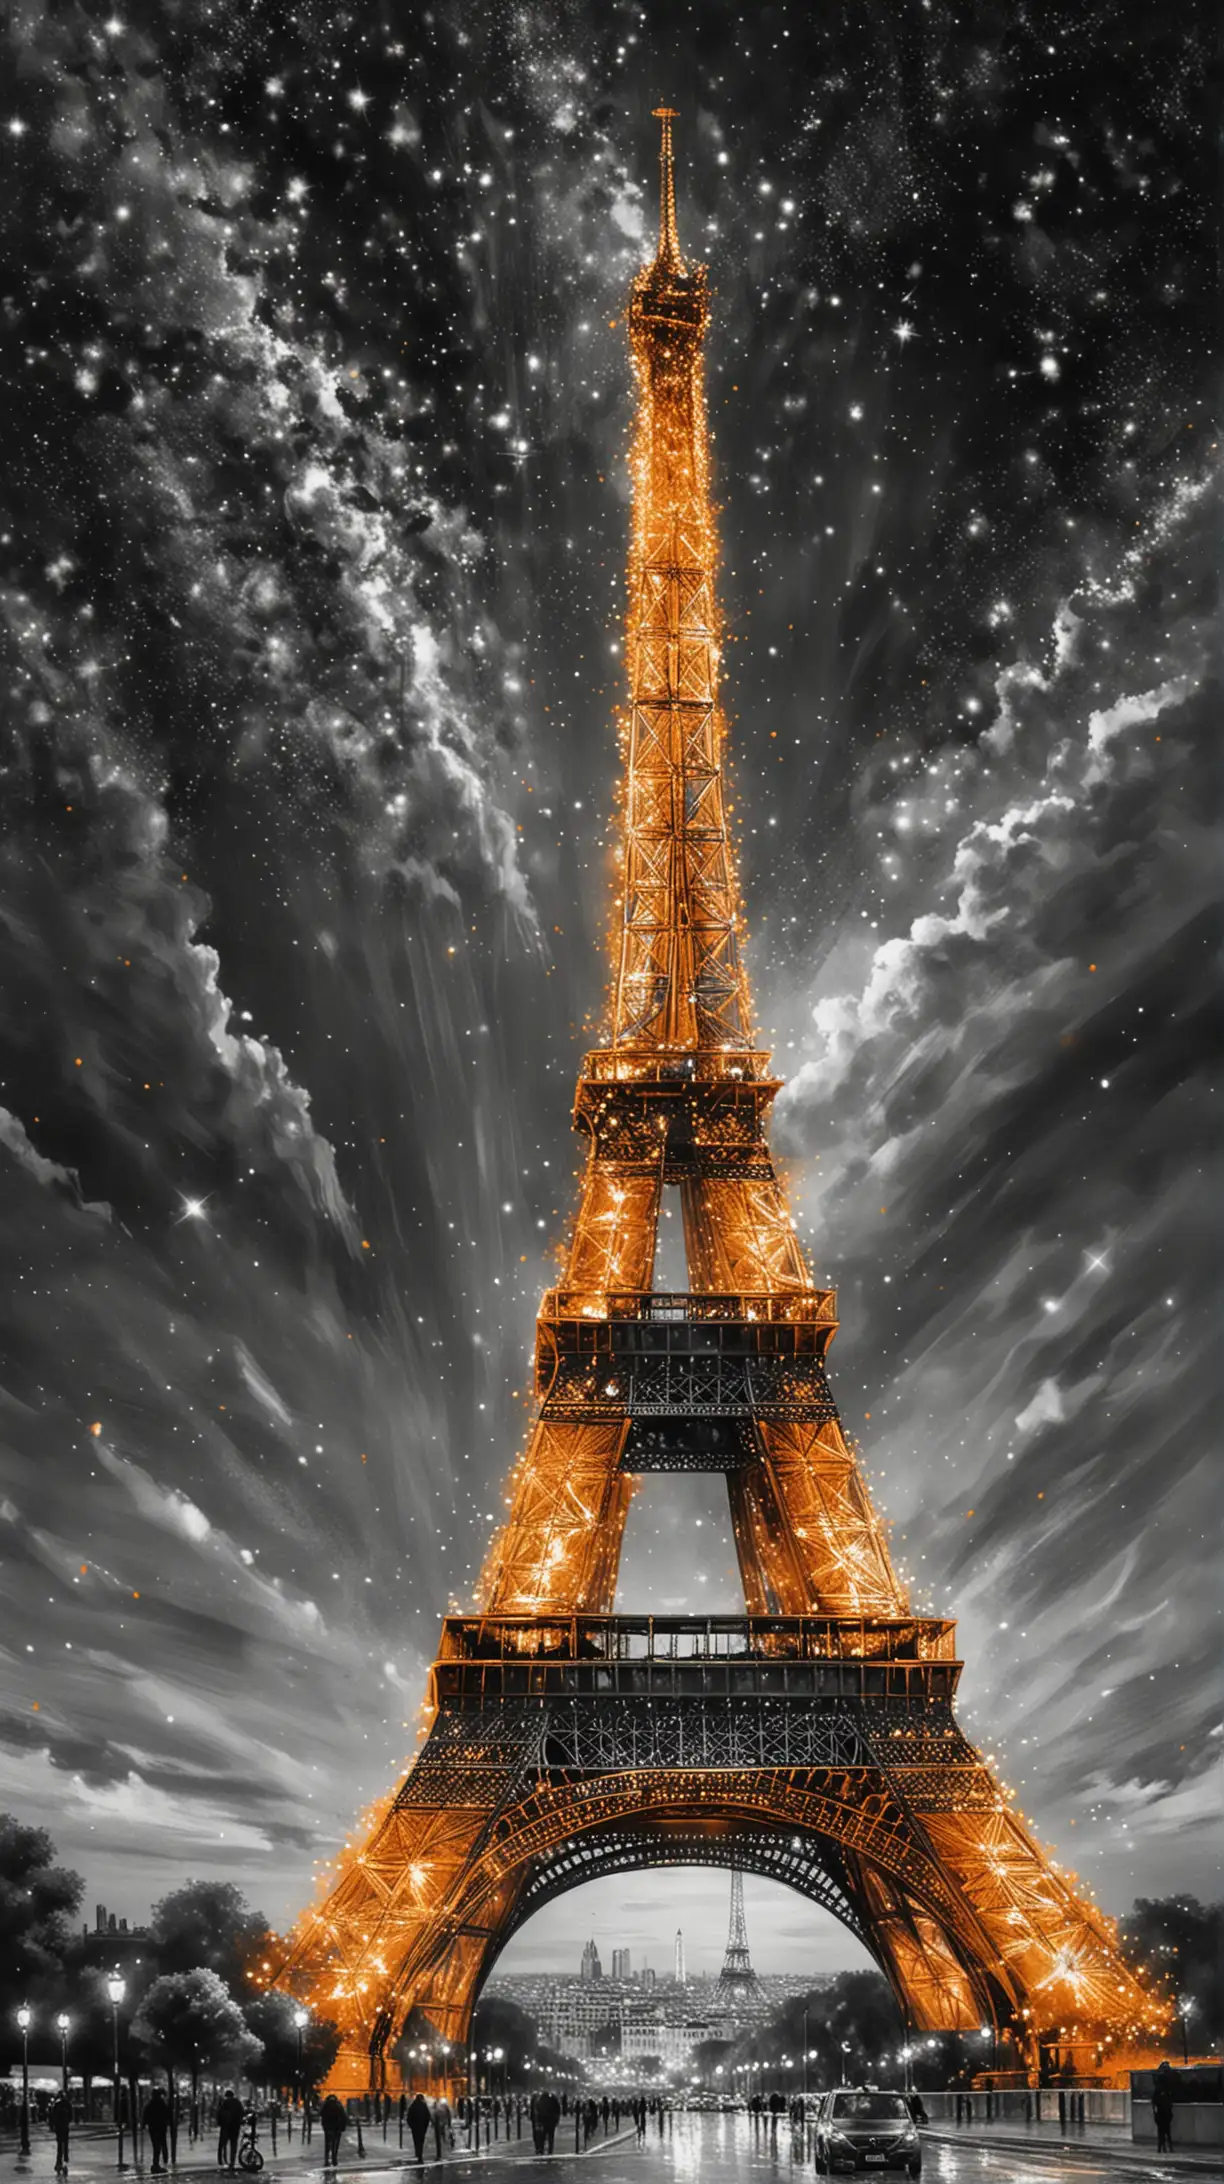 Make black and white oil painting picture of Paris, Make Eiffel tower in orange colour with loads of sparkles and lights, and very radiant, 4k picture, make it as much real as possible, make sky with full of bright stars 